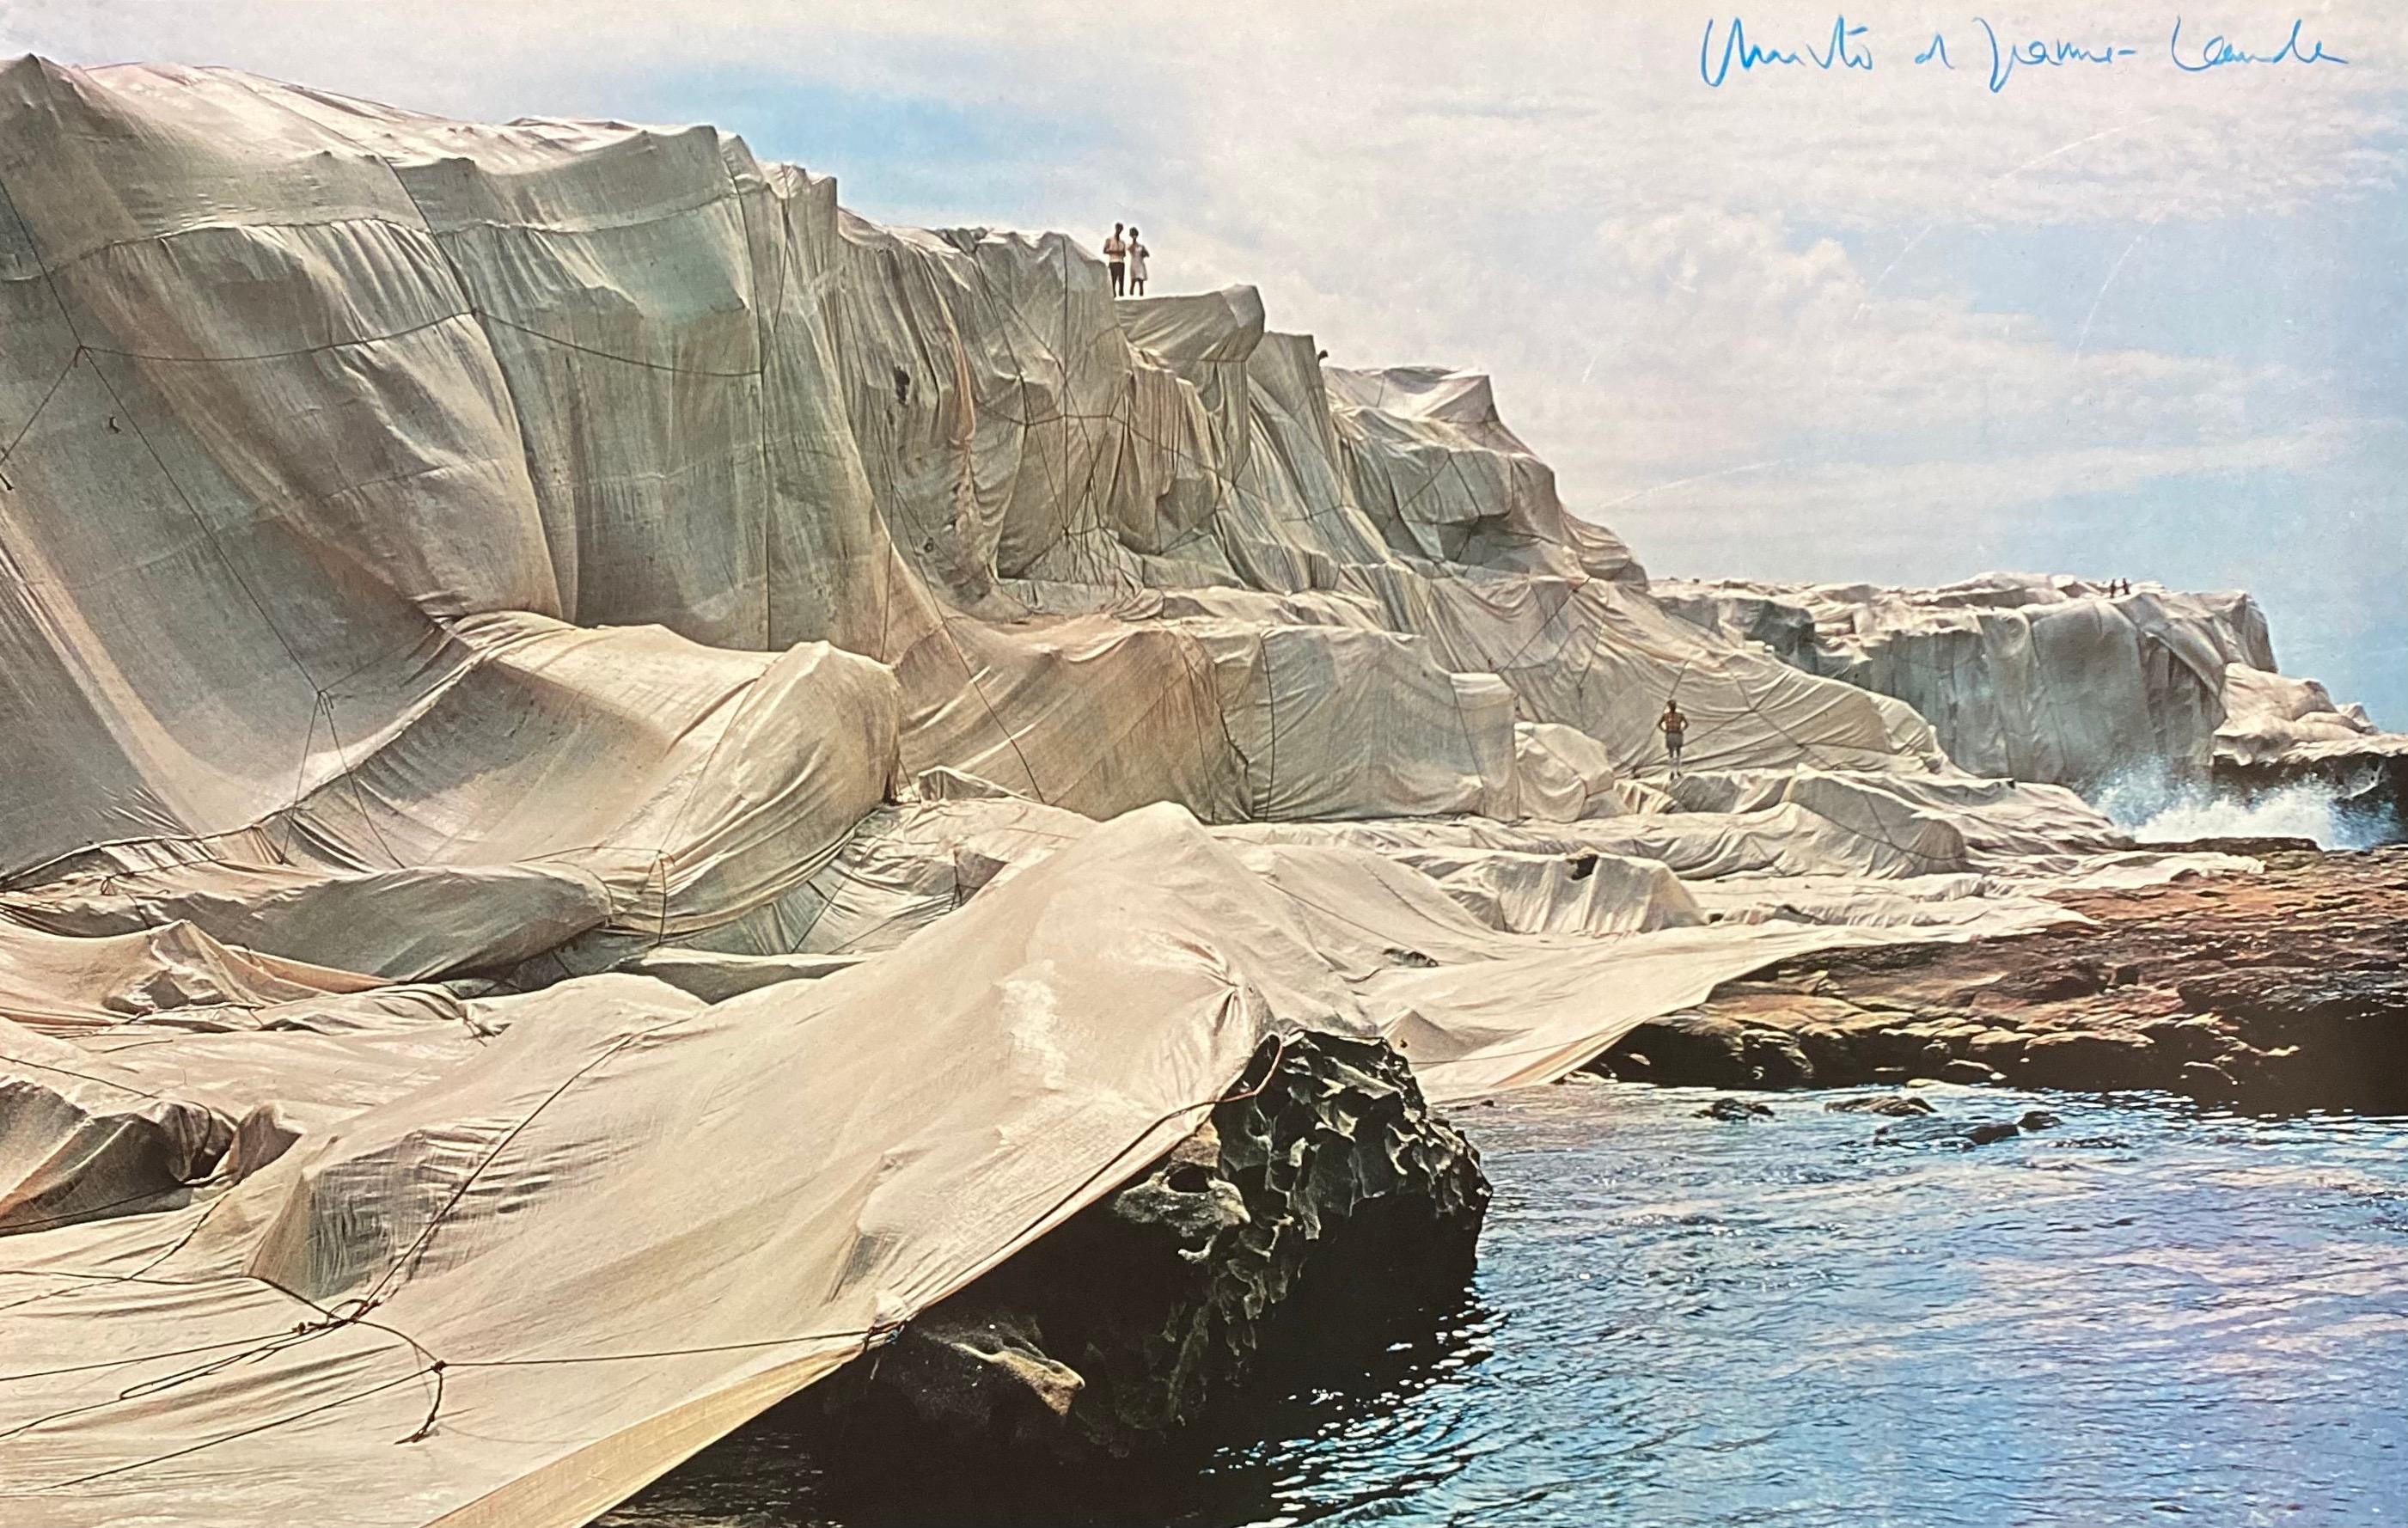 Christo and Jeanne-Claude Landscape Print - Christo and Jeanne Claude 'Wrapped Coast' Little Bay, Australia Signed Print